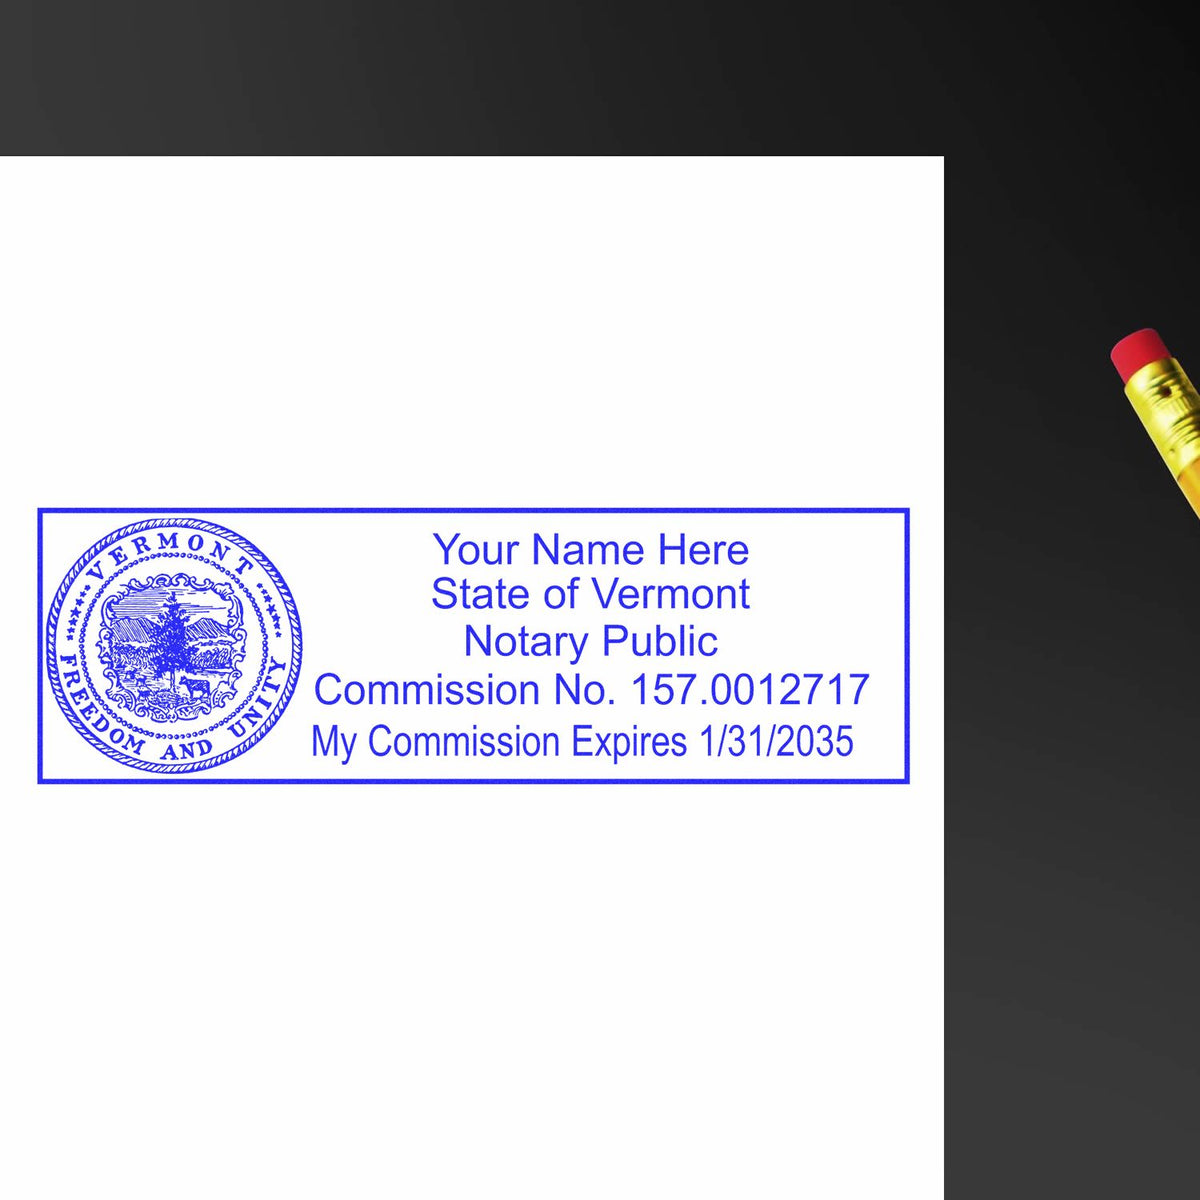 An alternative view of the Super Slim Vermont Notary Public Stamp stamped on a sheet of paper showing the image in use